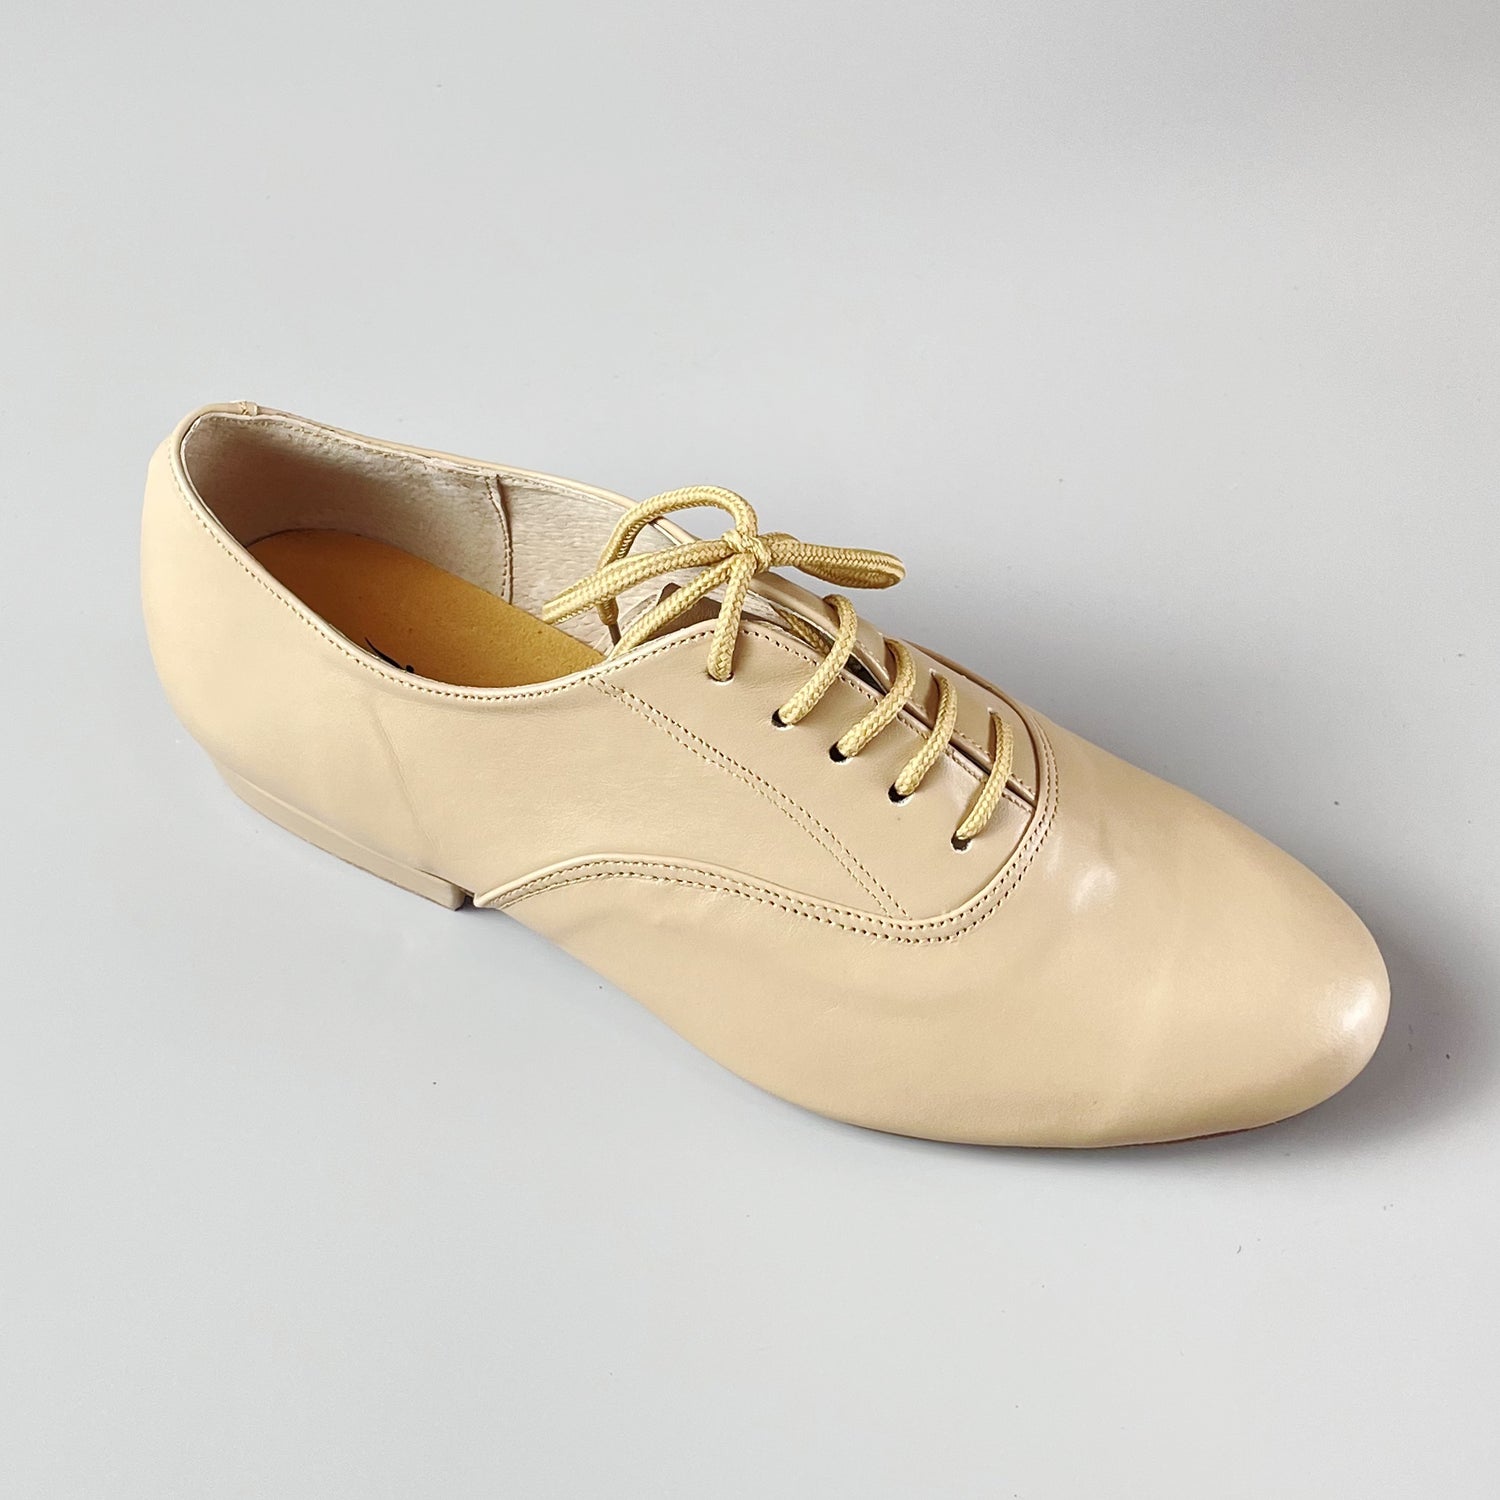 Pro Dancer Men's Tango Shoes with 1 inch Heel, Leather, Lace-up in Nude color0